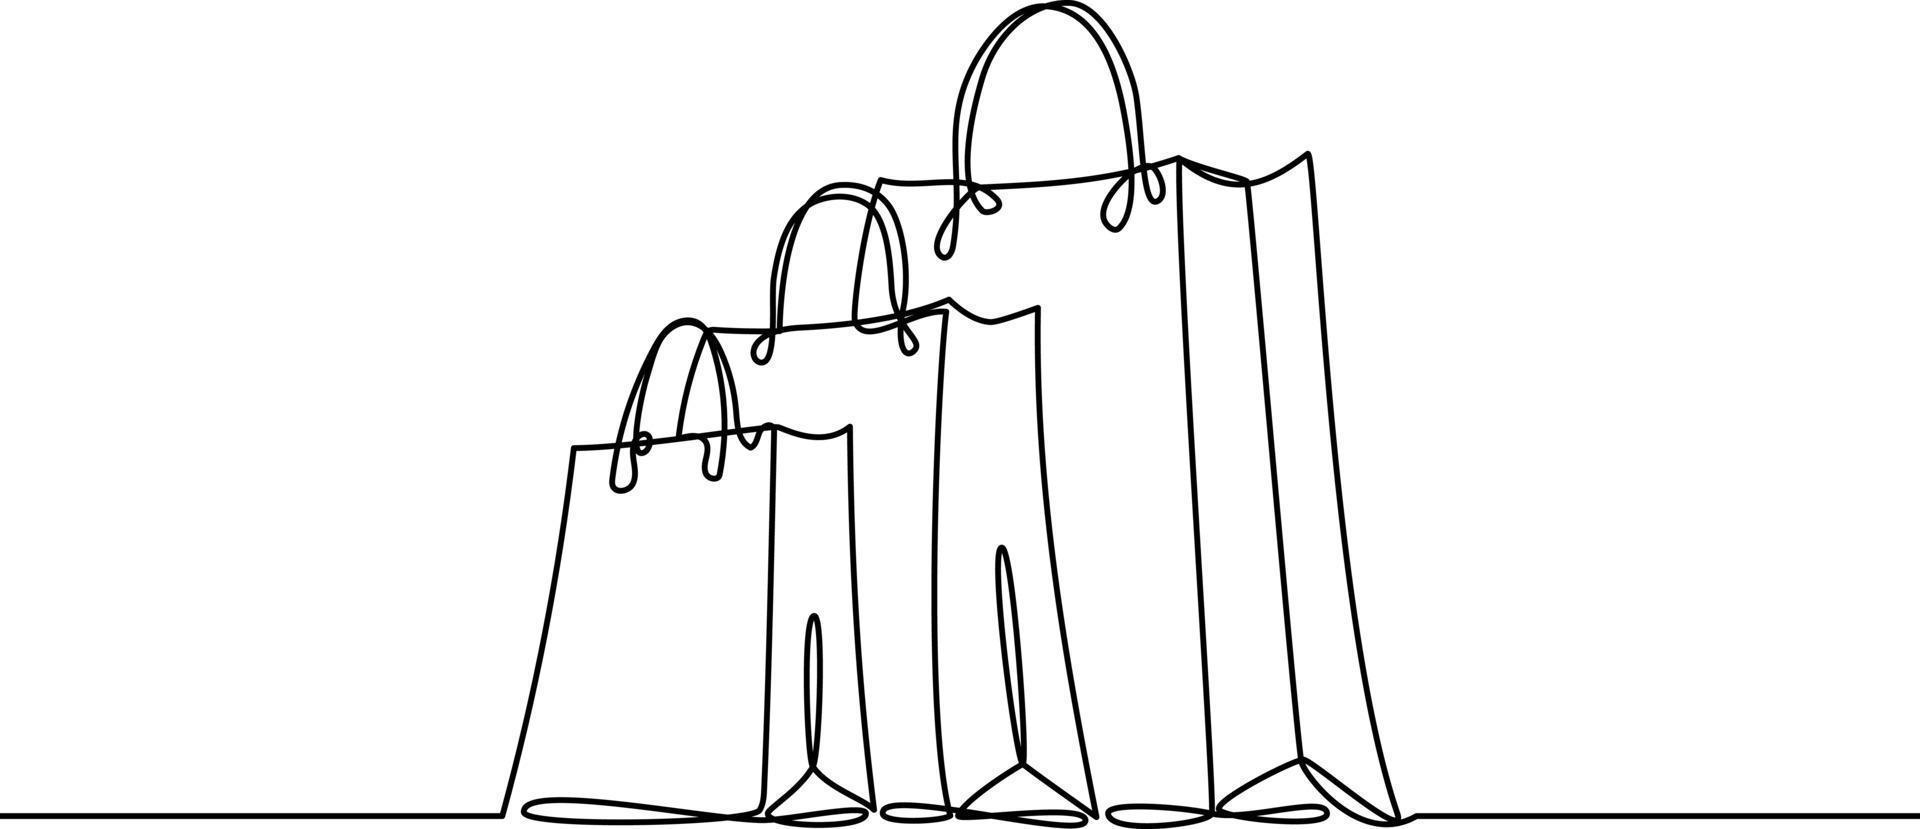 Paper shopping bags continuous line drawing vector